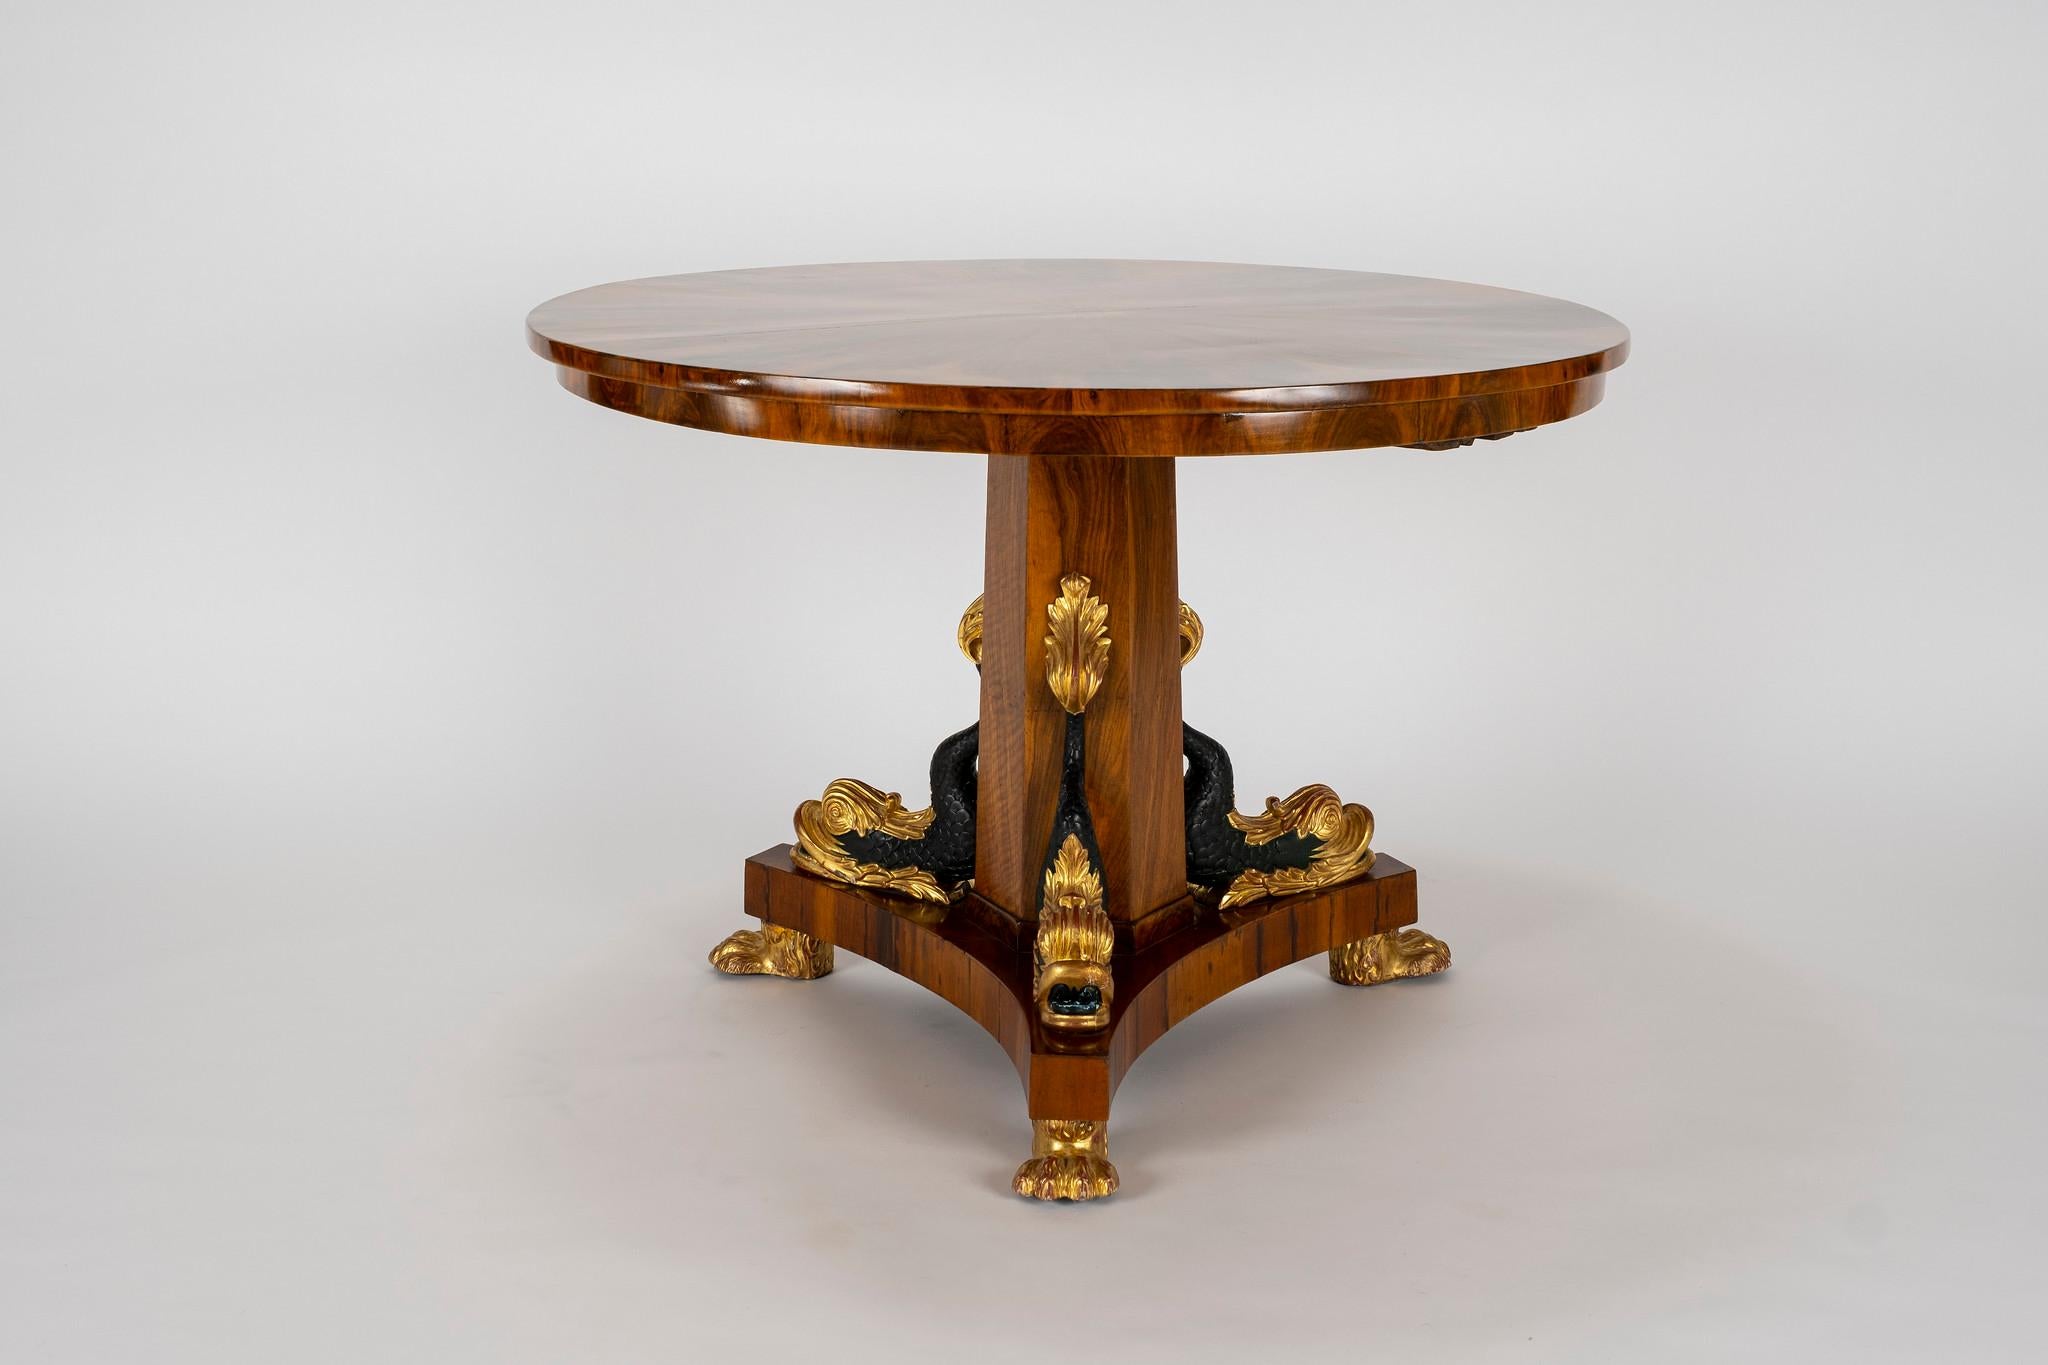 Early 20th century Empire lacquered walnut dolphin center table.